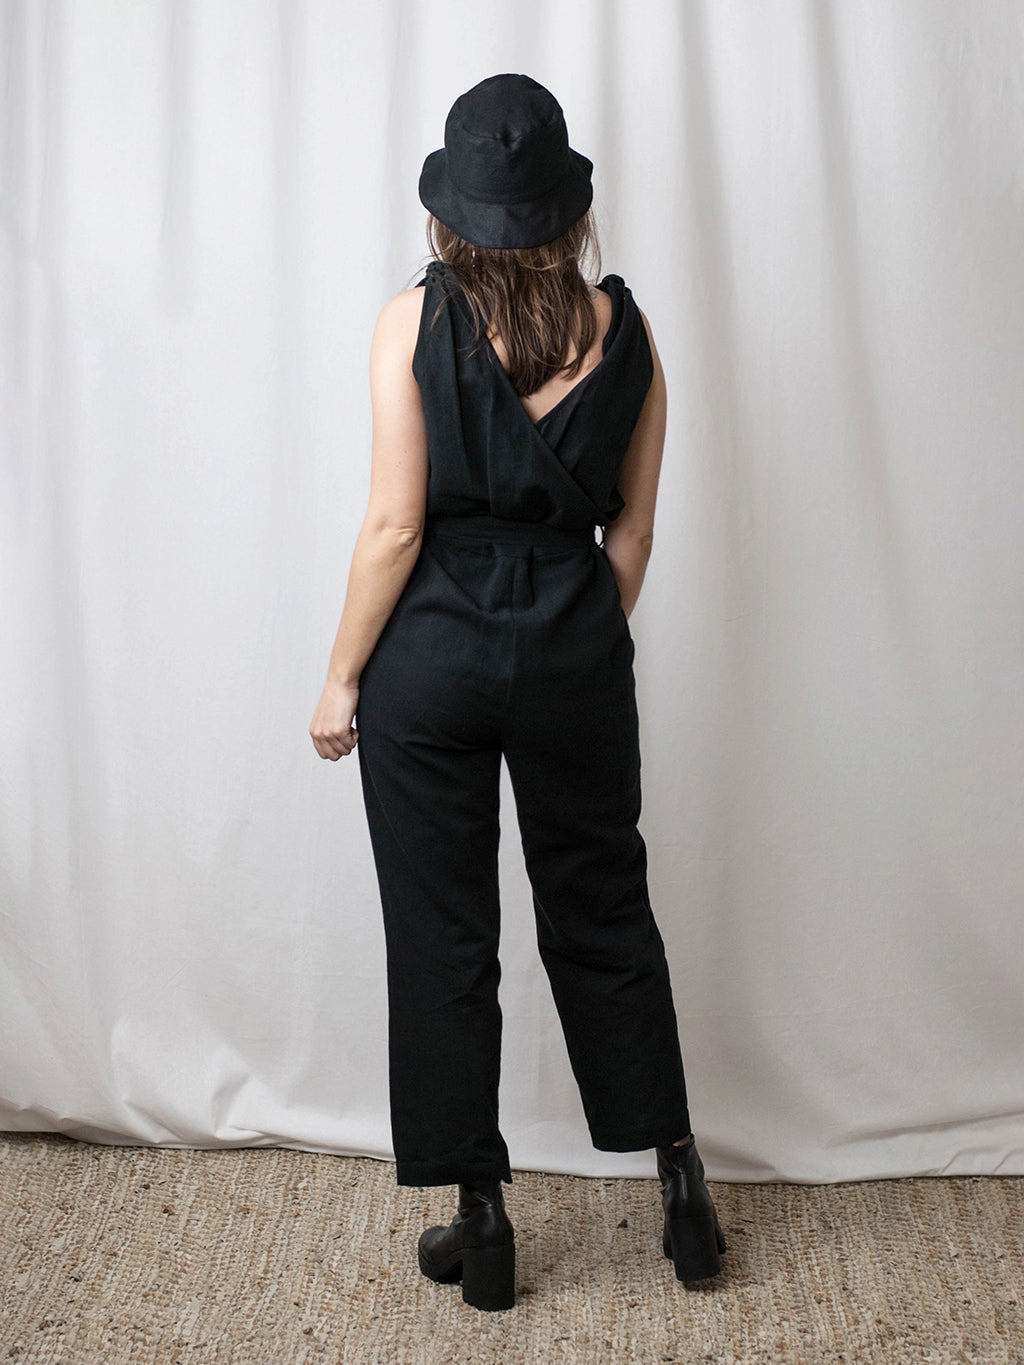 Linen black jumpsuit. Ethically made in Slovenia.